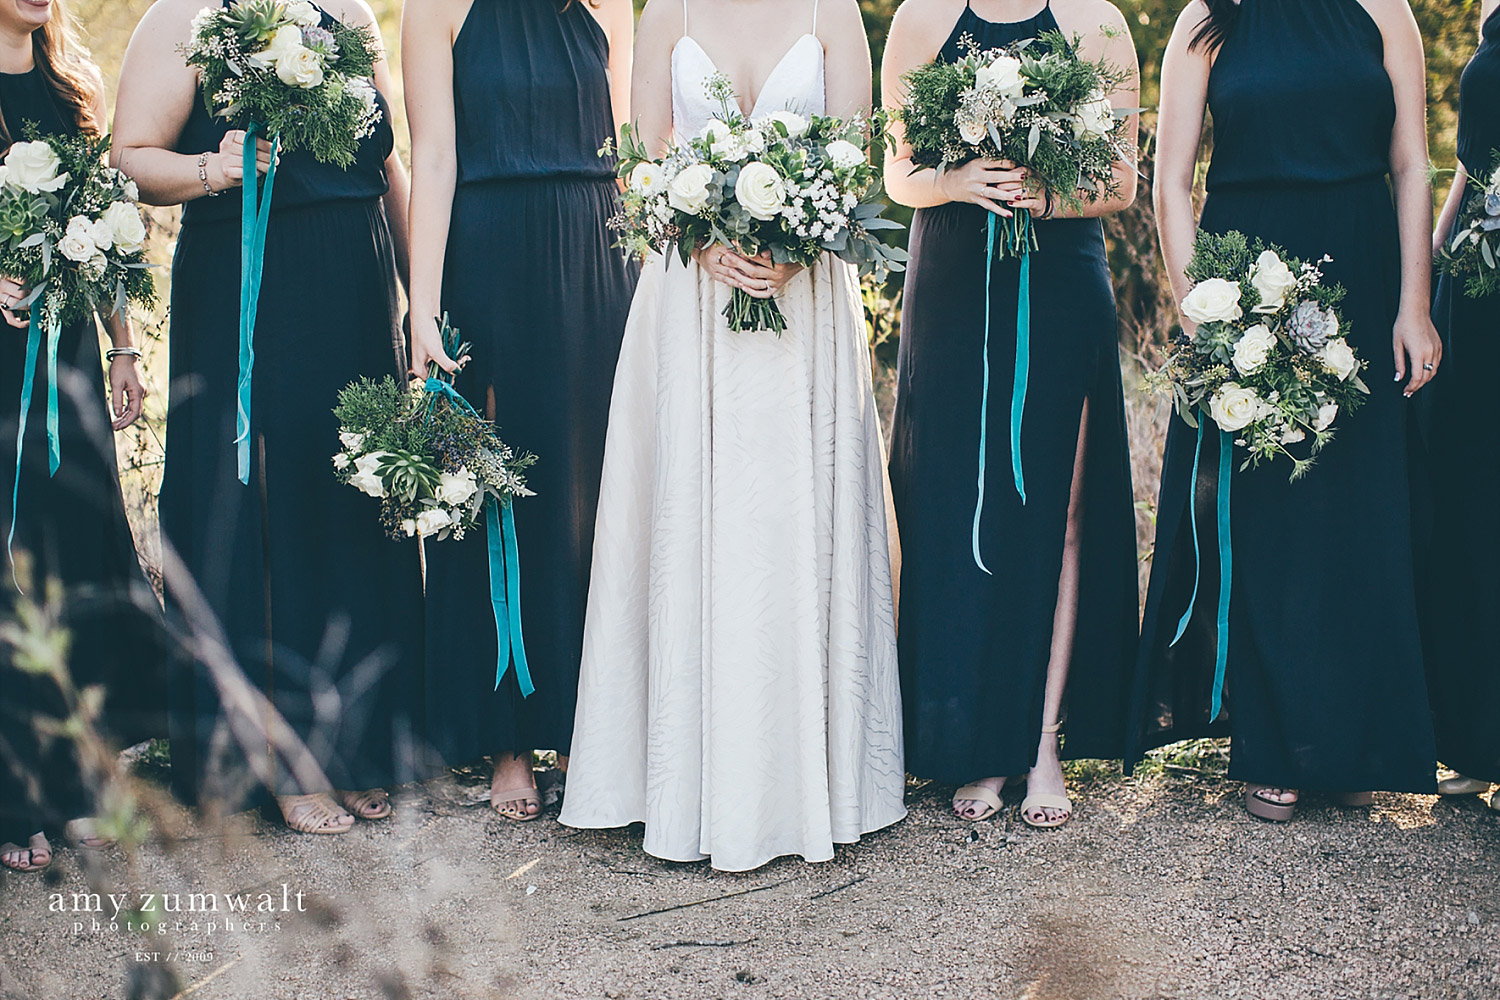 Bridesmaids in low navy dresses with velvet hanging ribbon from their greenery bouquets